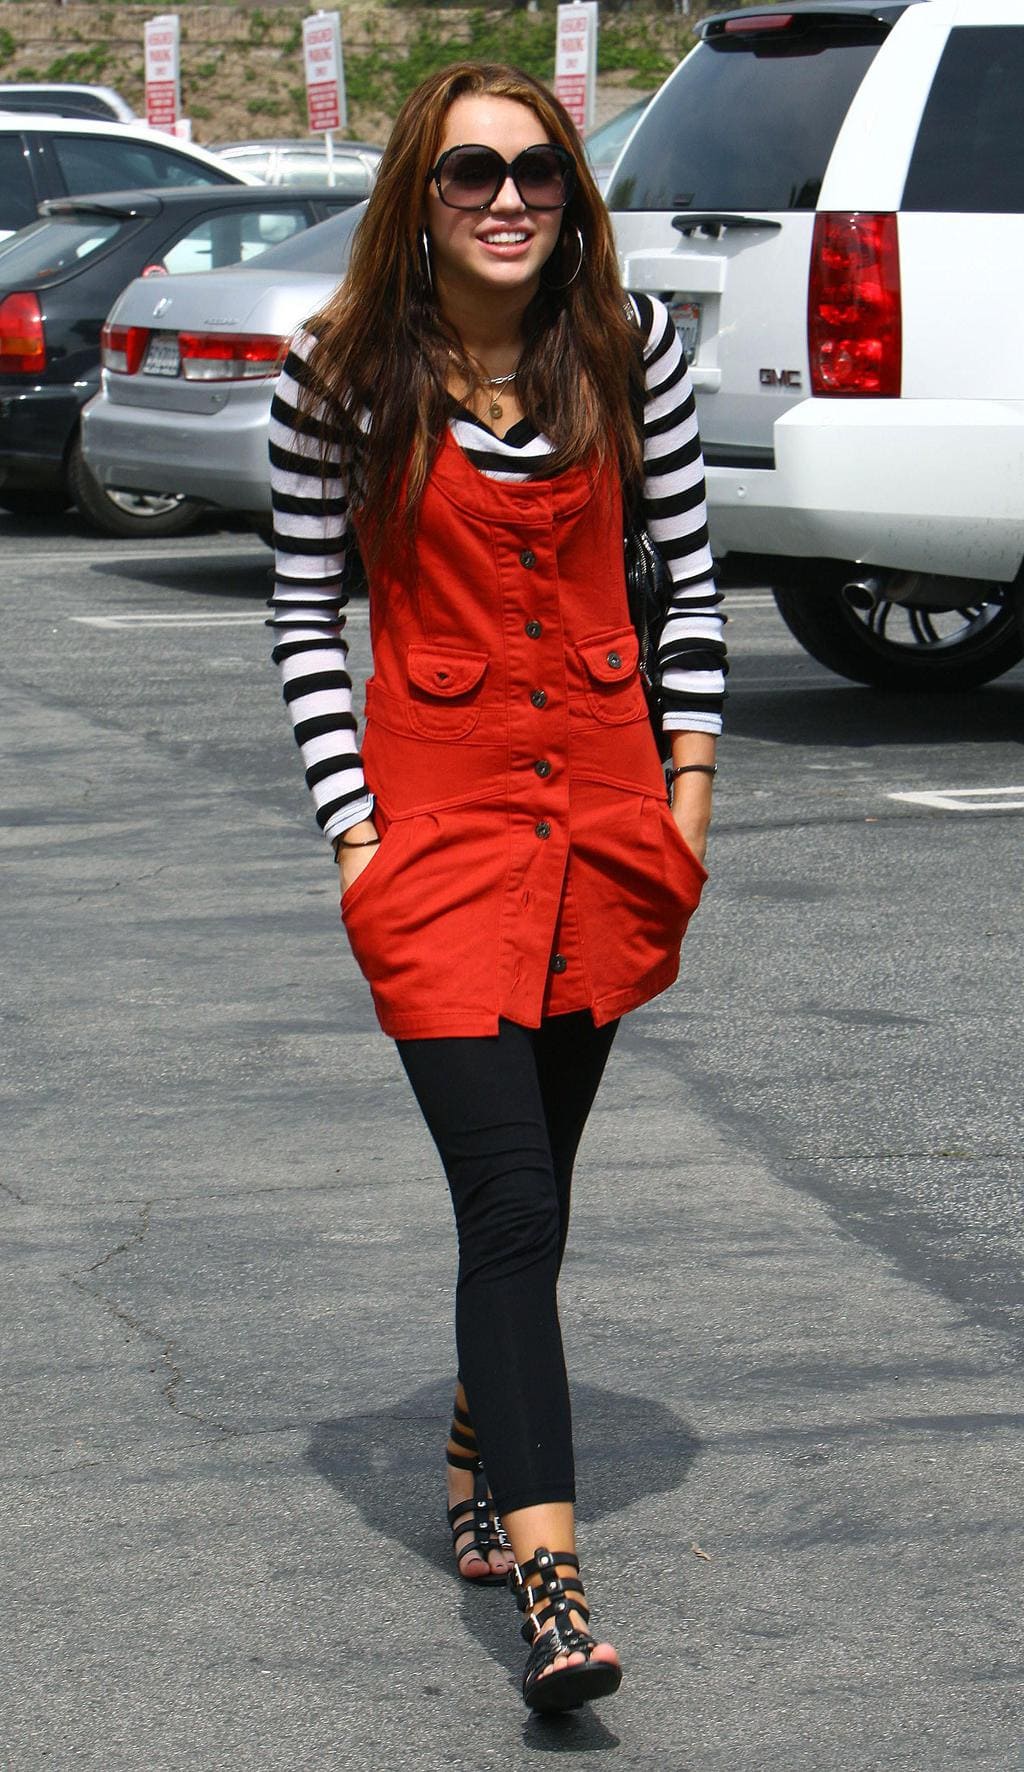 miley cyrus walking in a jumper dress, long sleeve striped tee shirt, leggings, and gladiator sandals